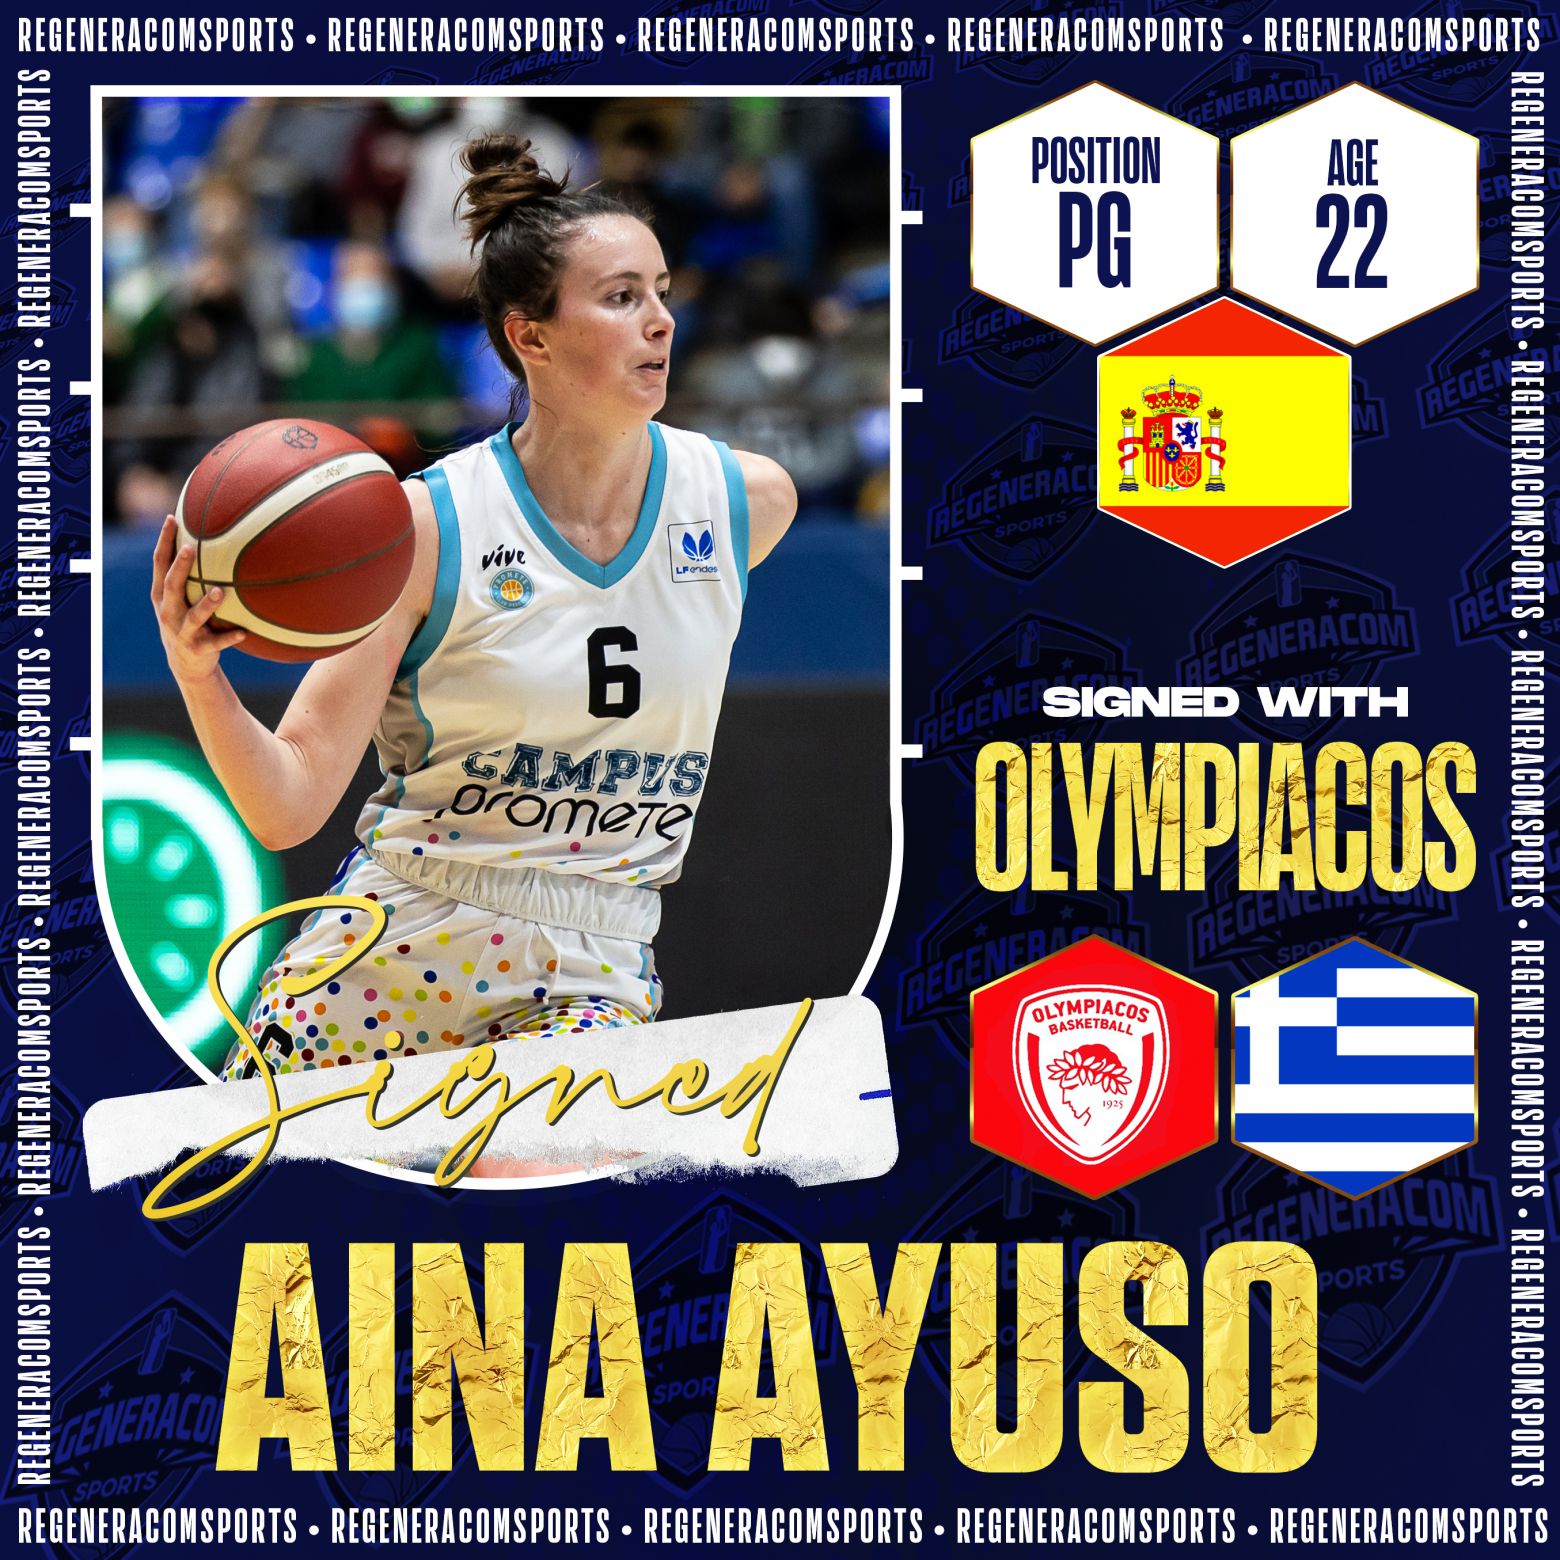 AINA AYUSO has signed with Olympiacos for the 2022/23 season